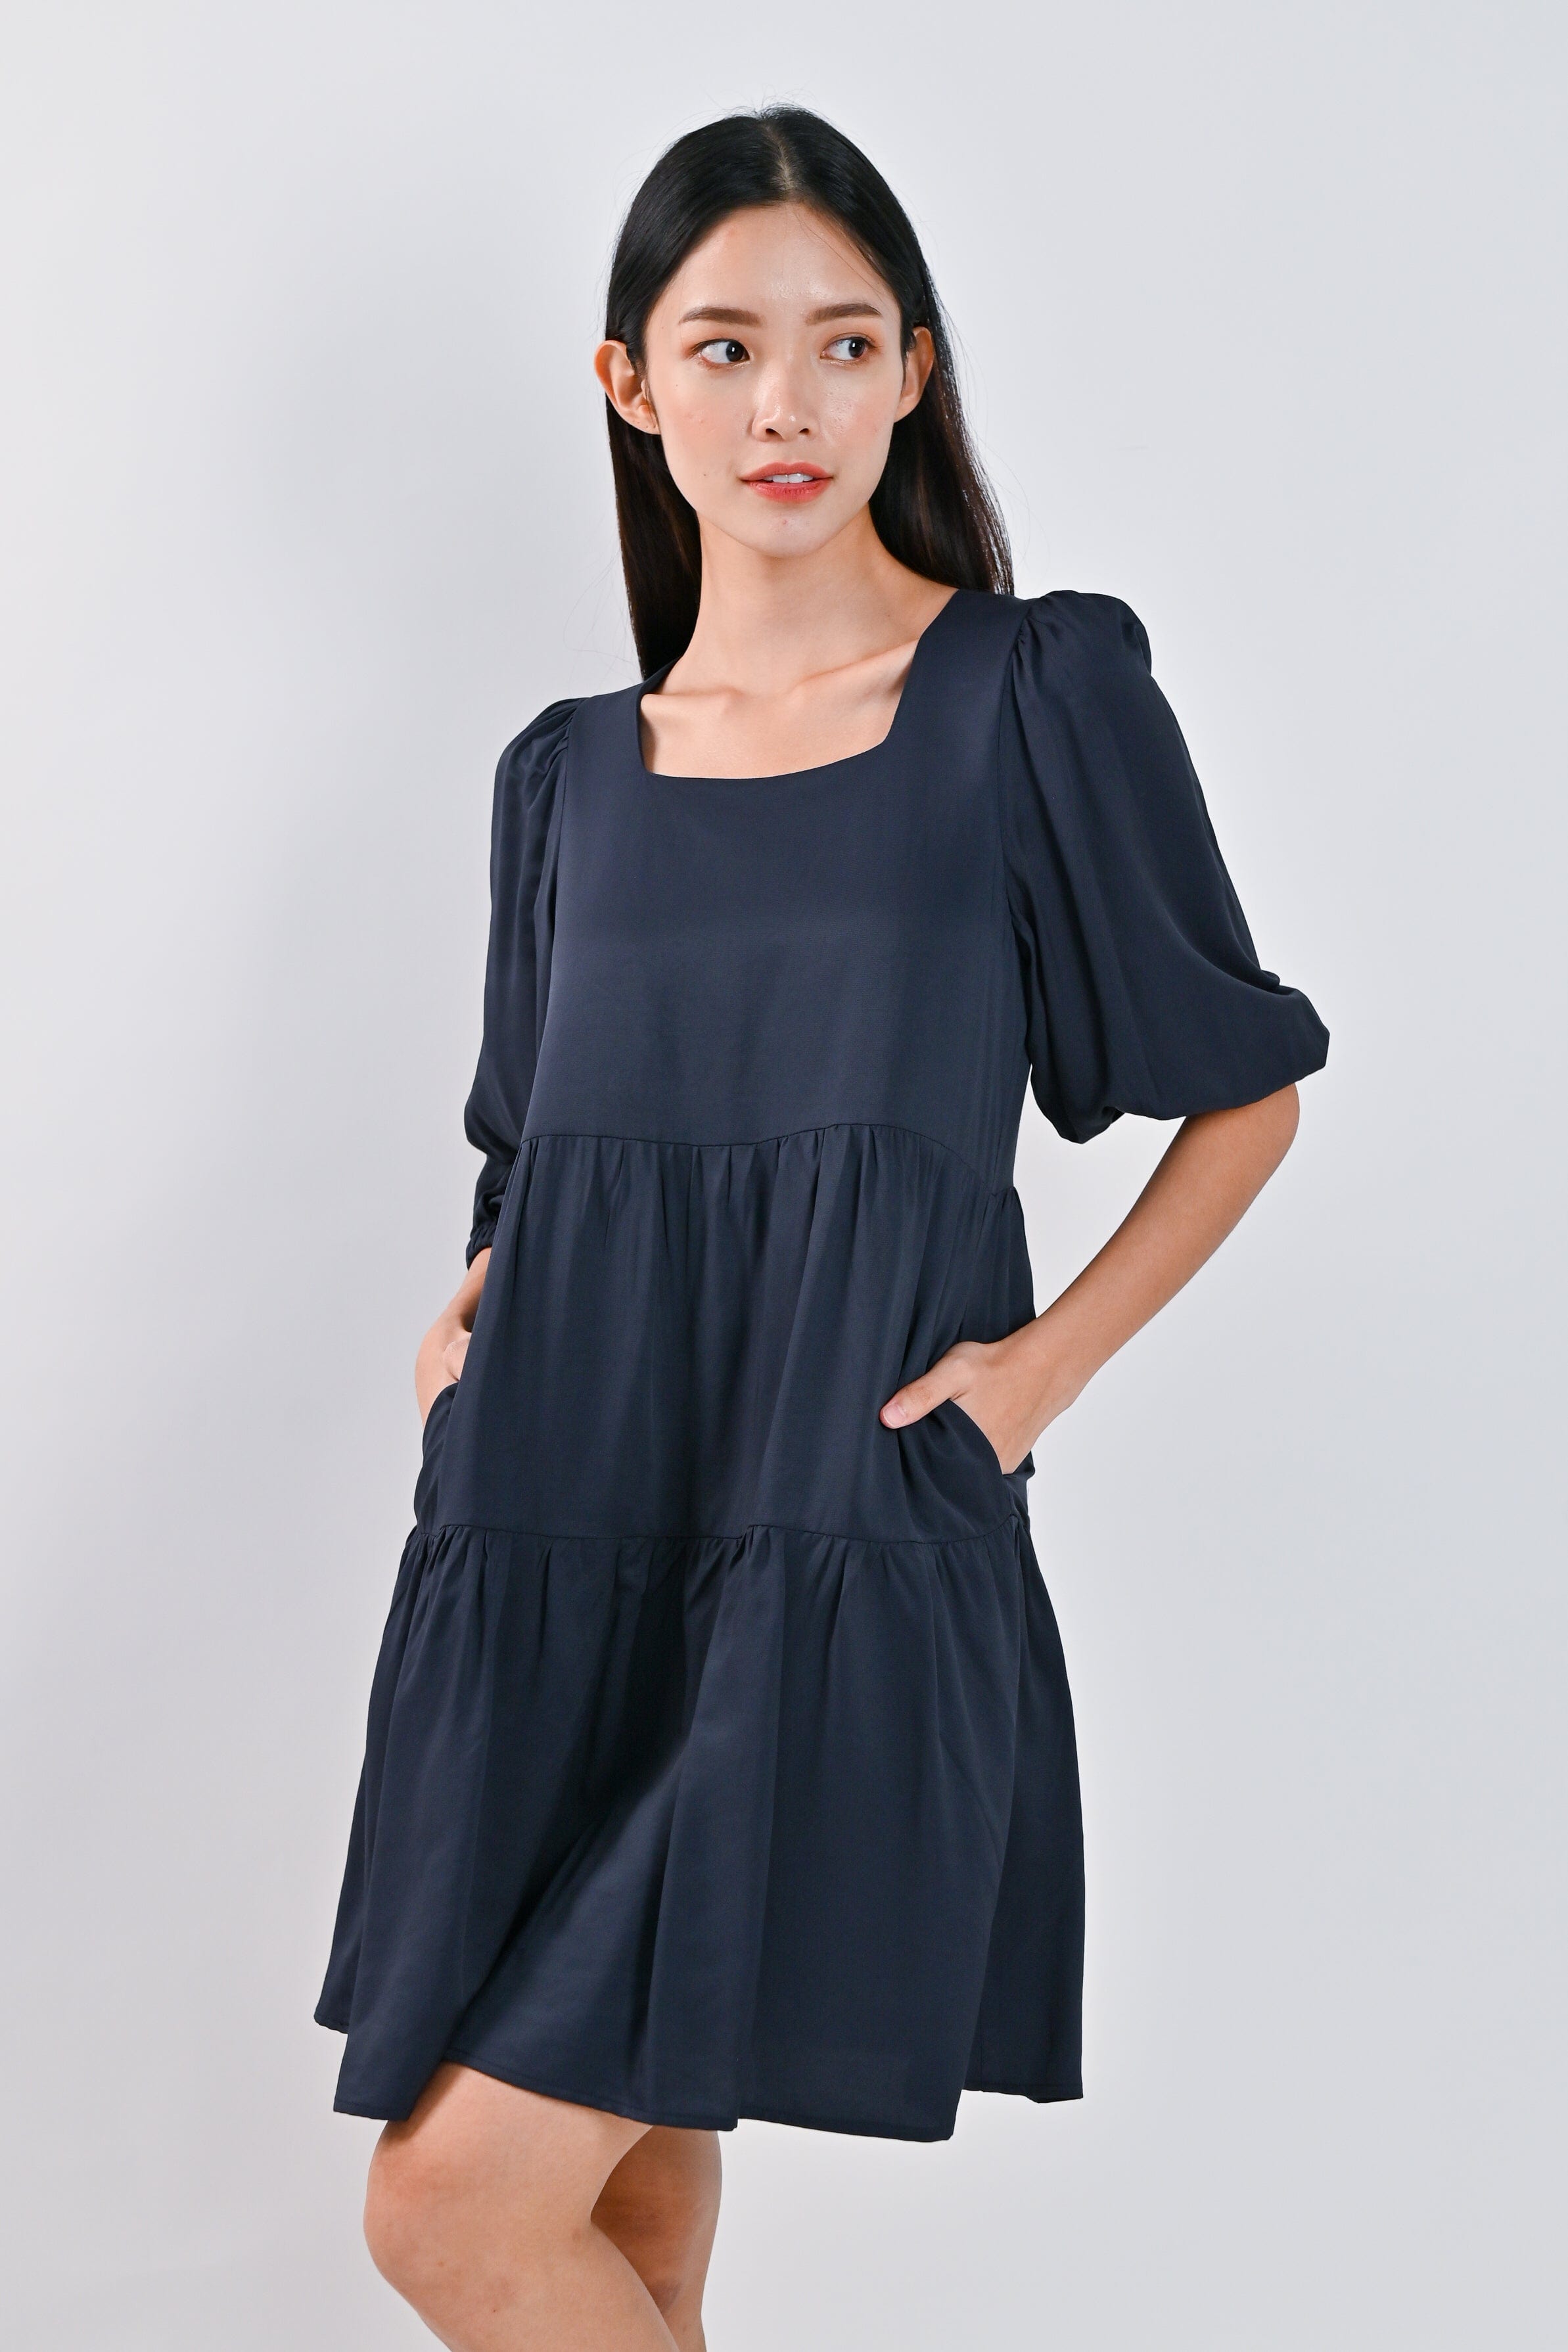 MARCIA SQUARE-NECK BABYDOLL DRESS IN NAVY – All Would Envy